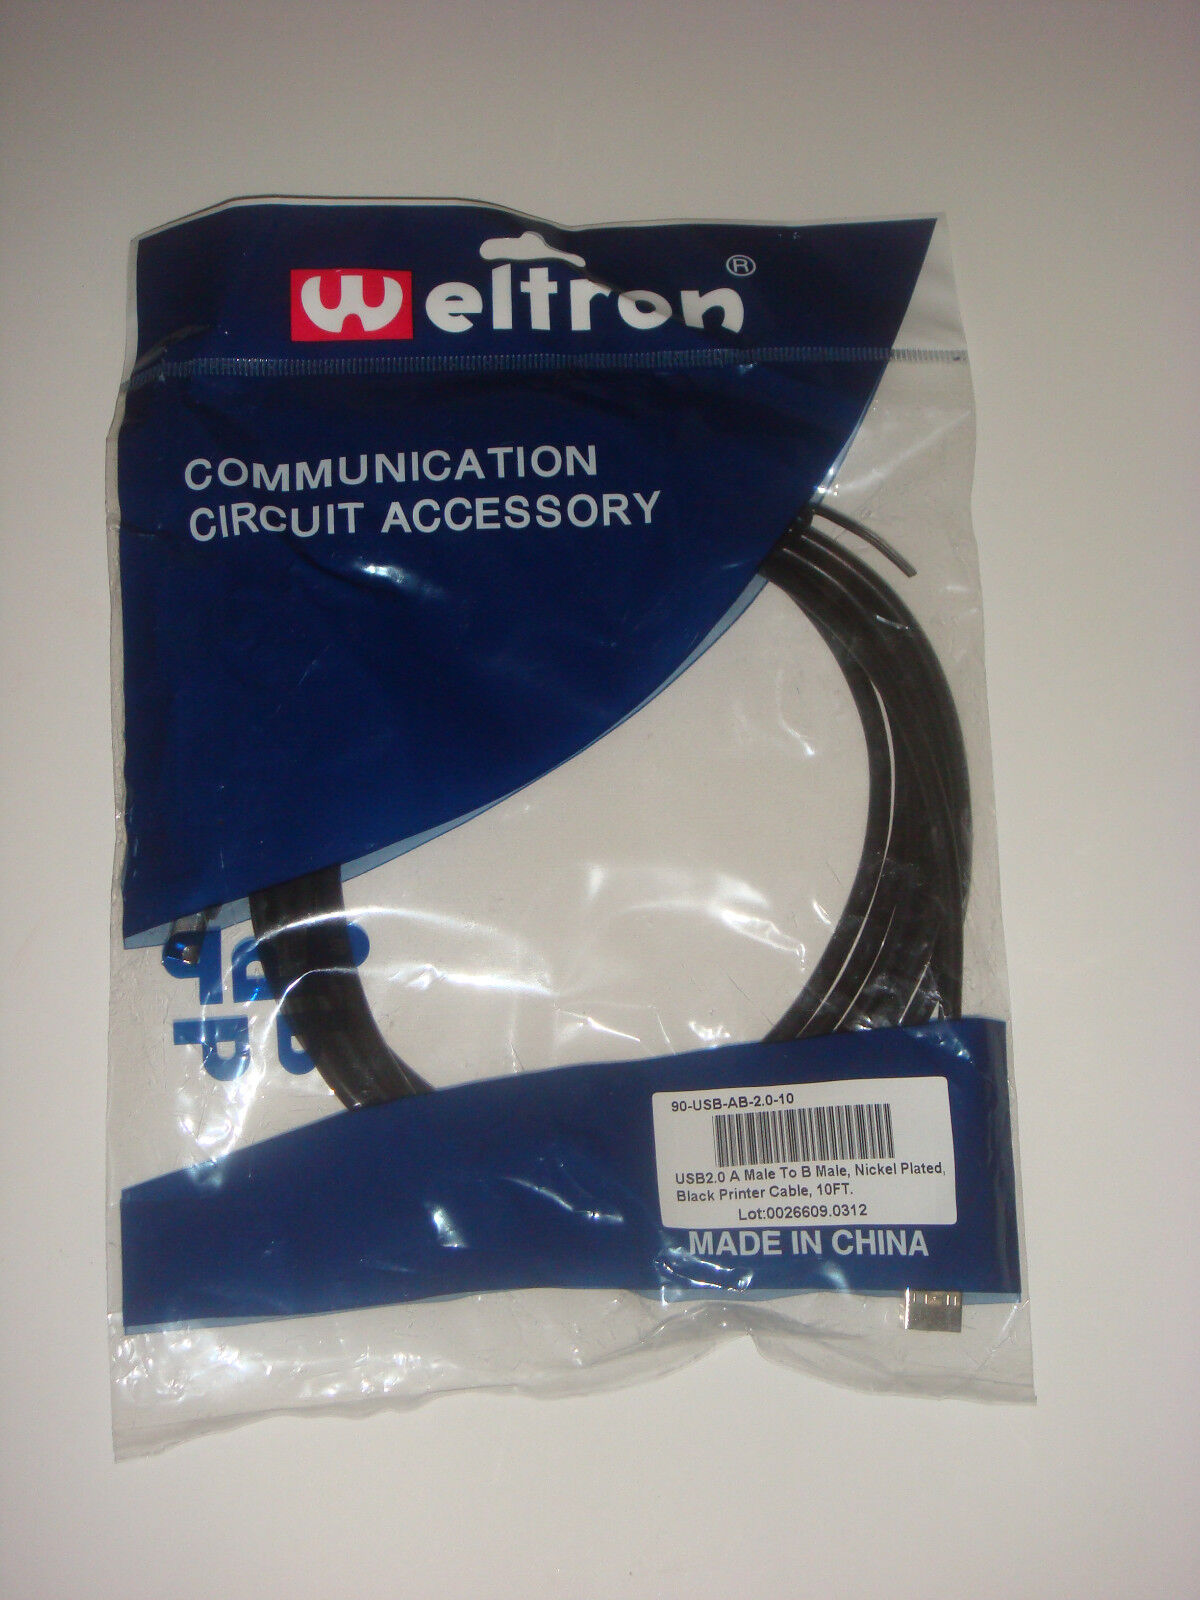 Weltron 10ft USB Cable A to B USB 2.0 Cable 90-USB-AB-2.0-10 NEW